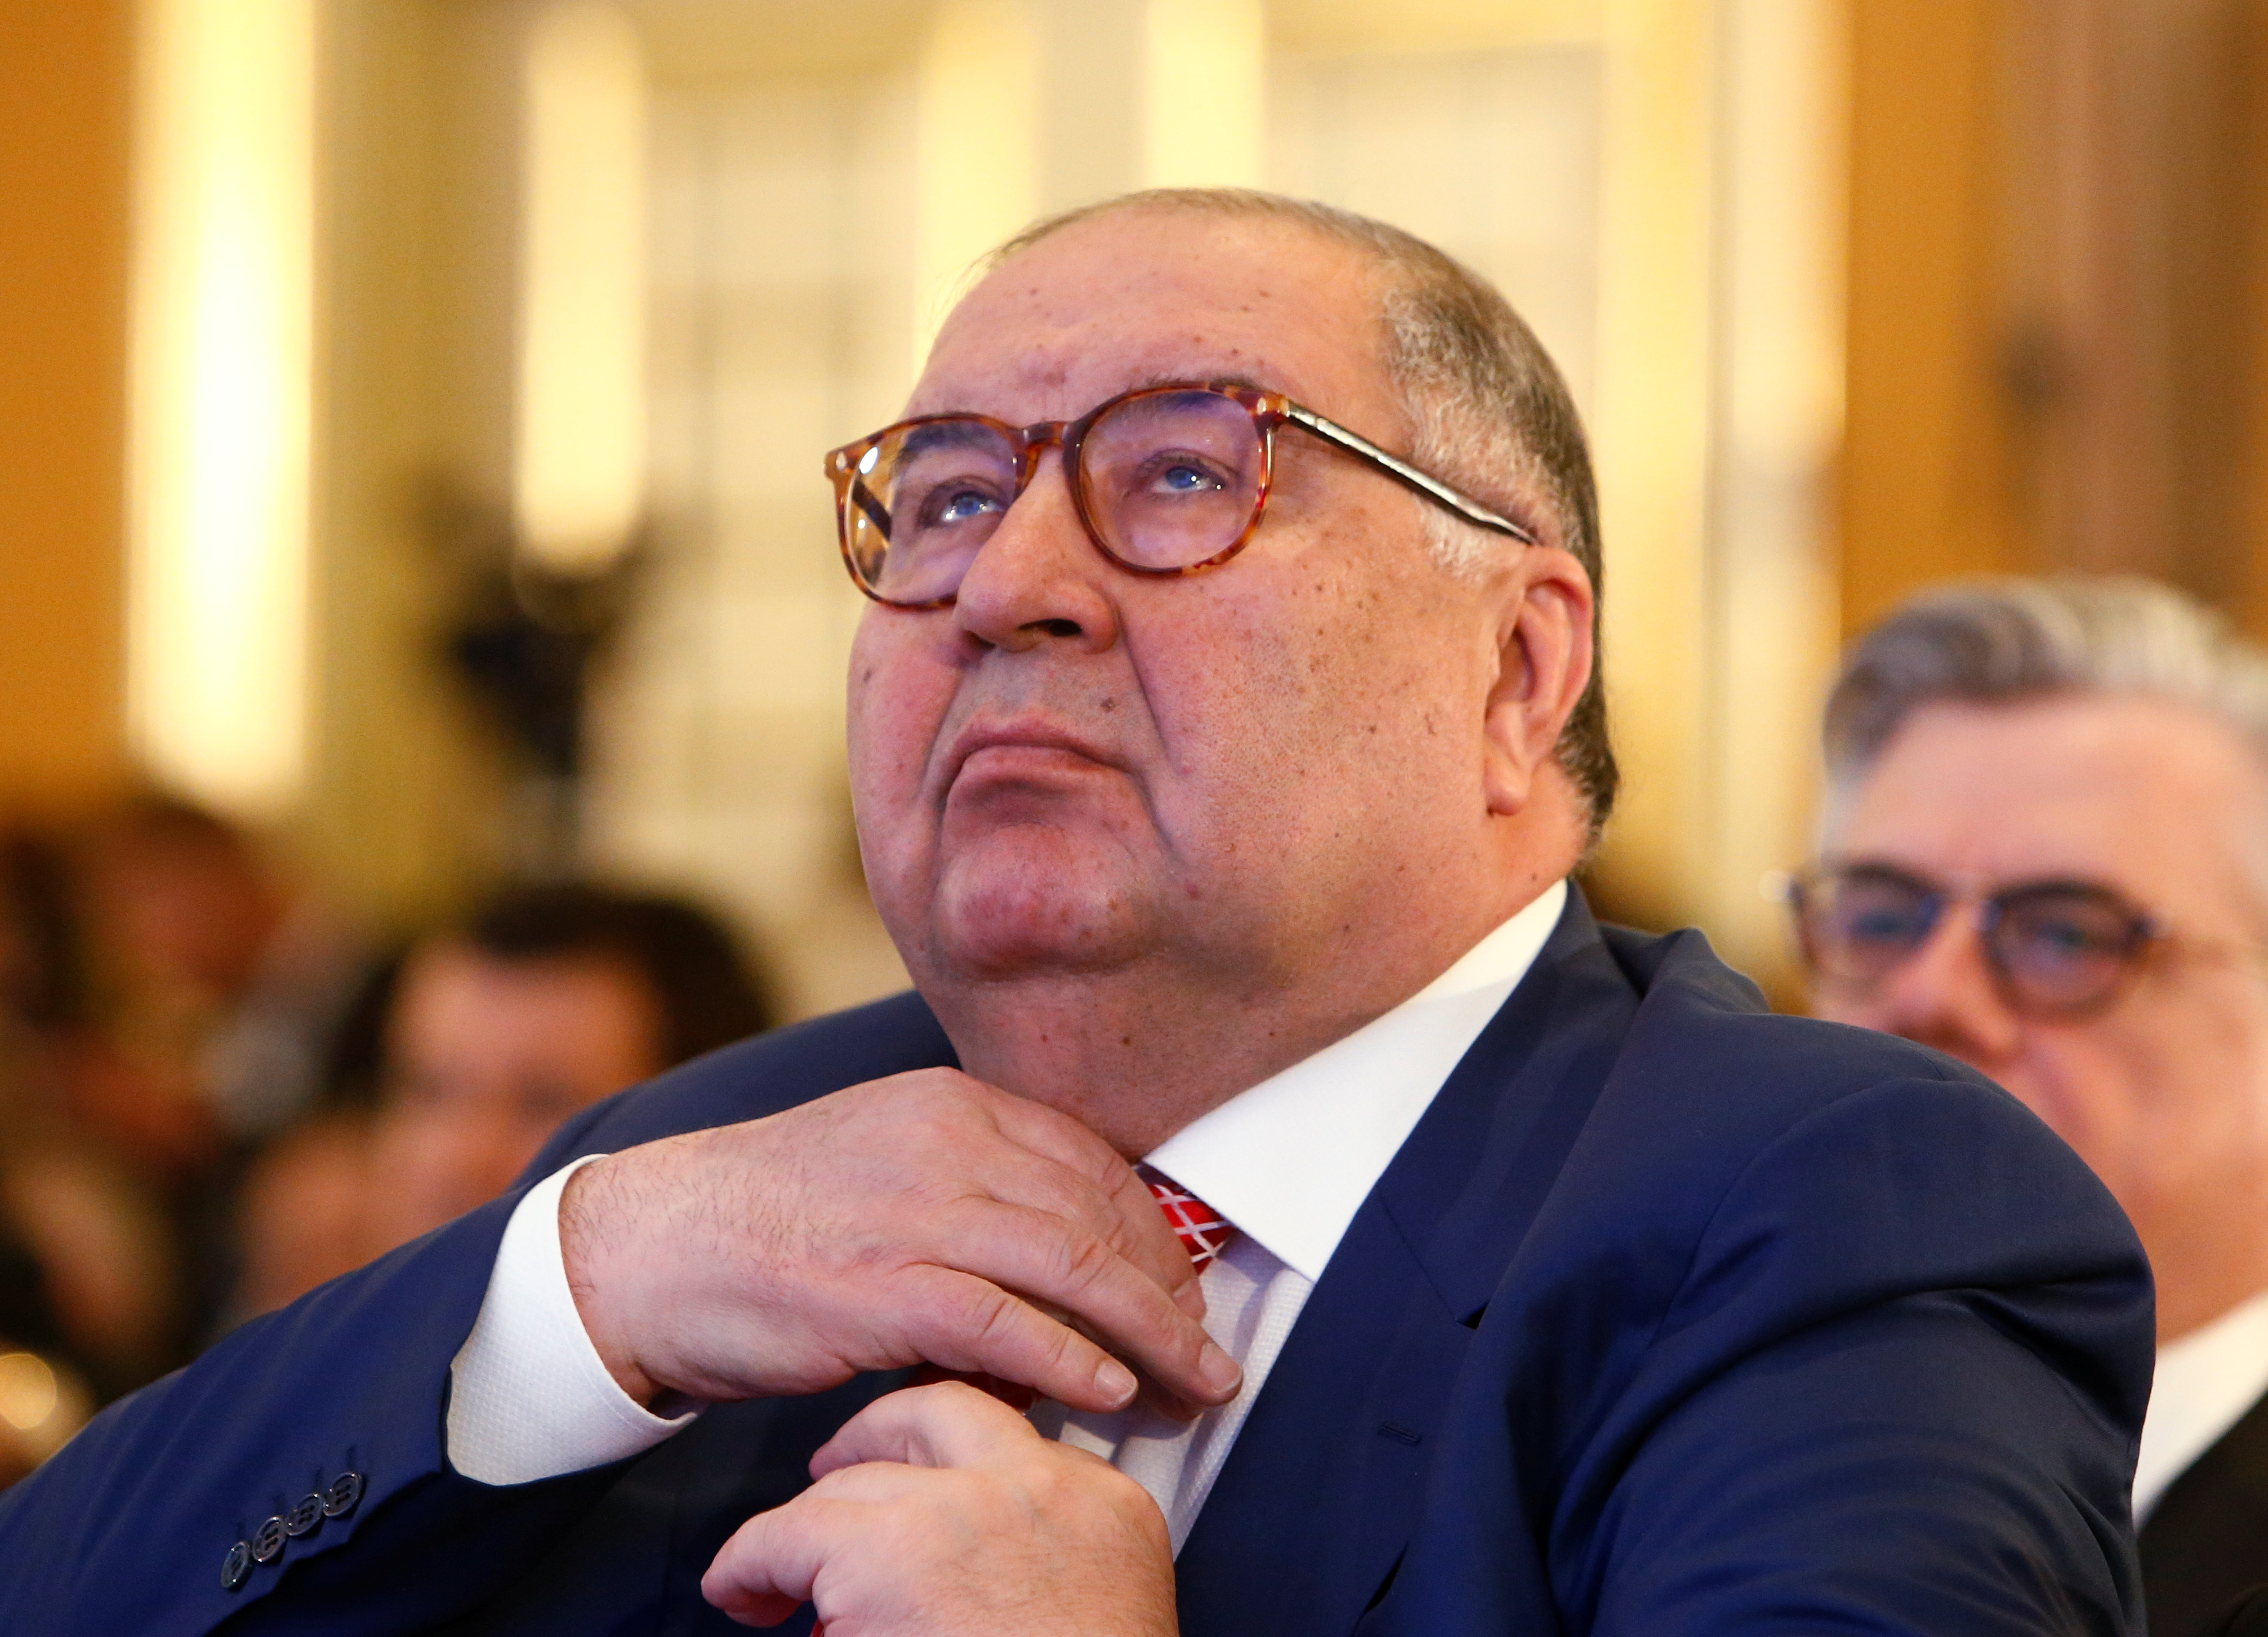 FILE PHOTO: Russian businessman and founder of USM Holdings Alisher Usmanov attends a session during the Week of Russian Business, organized by the Russian Union of Industrialists and Entrepreneurs (RSPP), in Moscow, Russia March 16, 2017. REUTERS/Sergei Karpukhin/File Photo